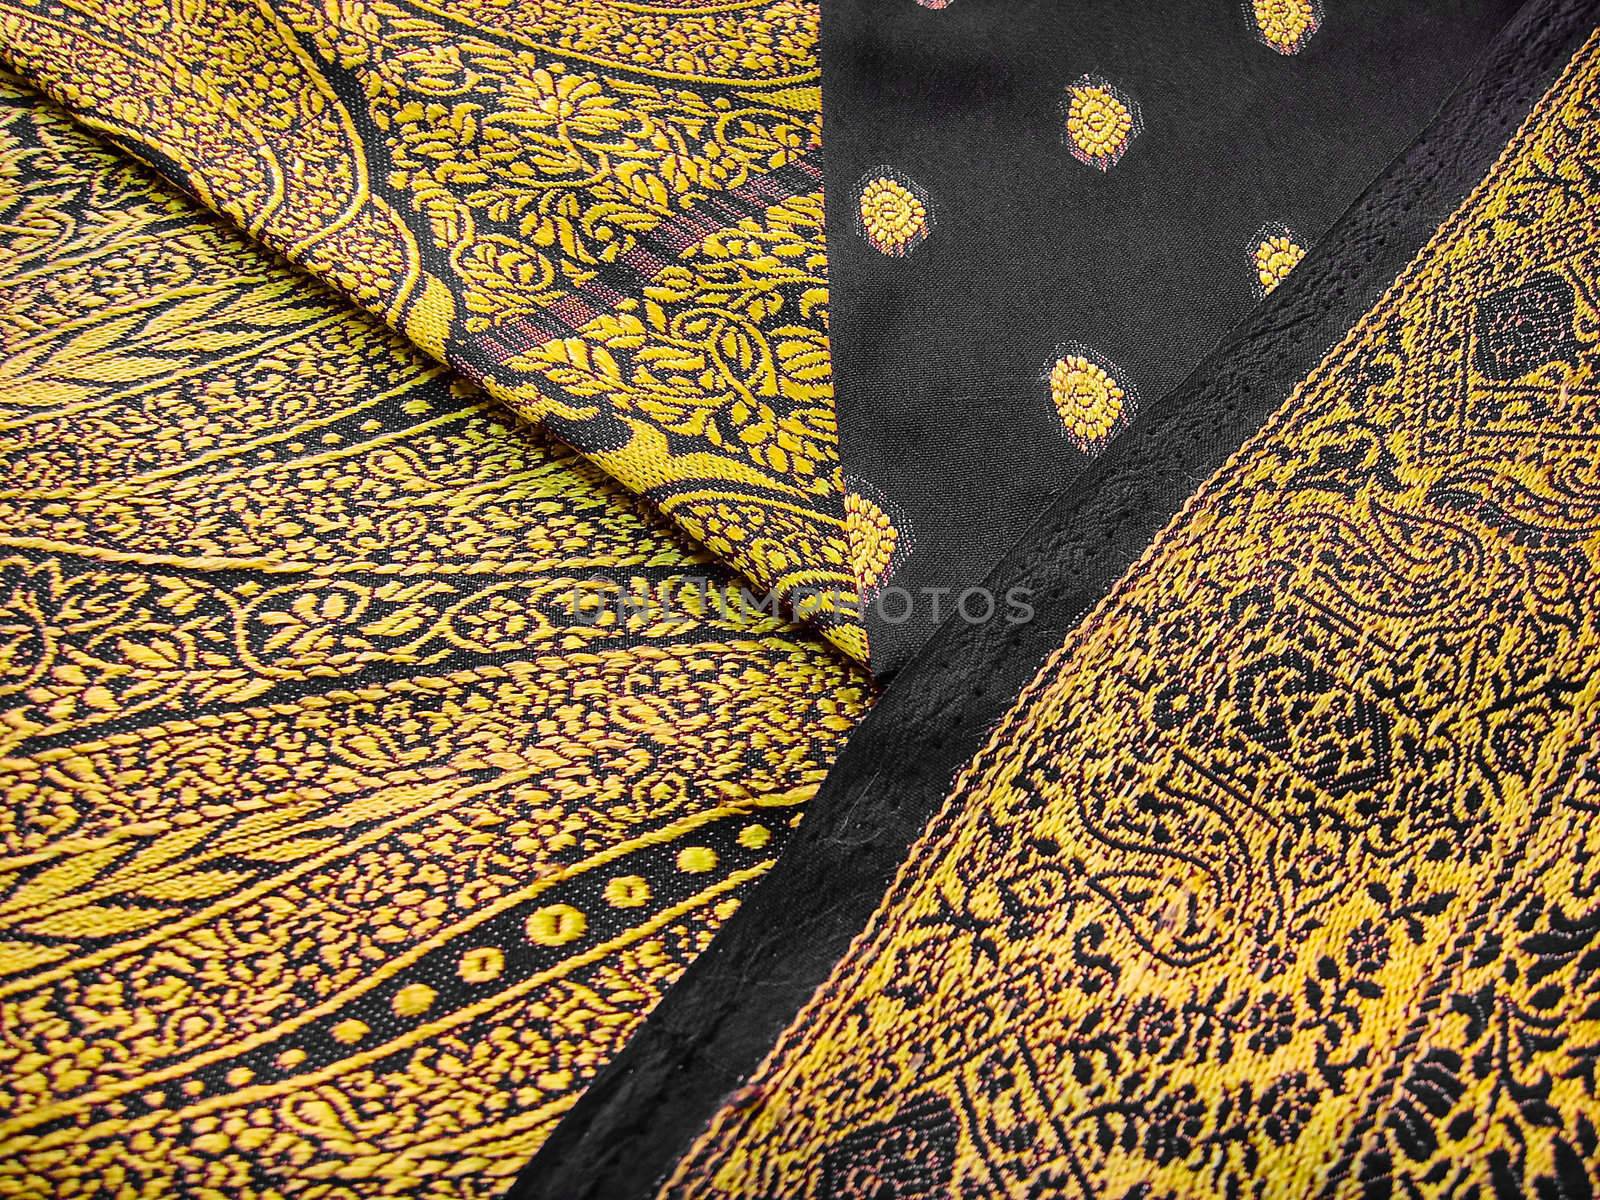 Black and yellow traditional indian outfit known as a saree/sari